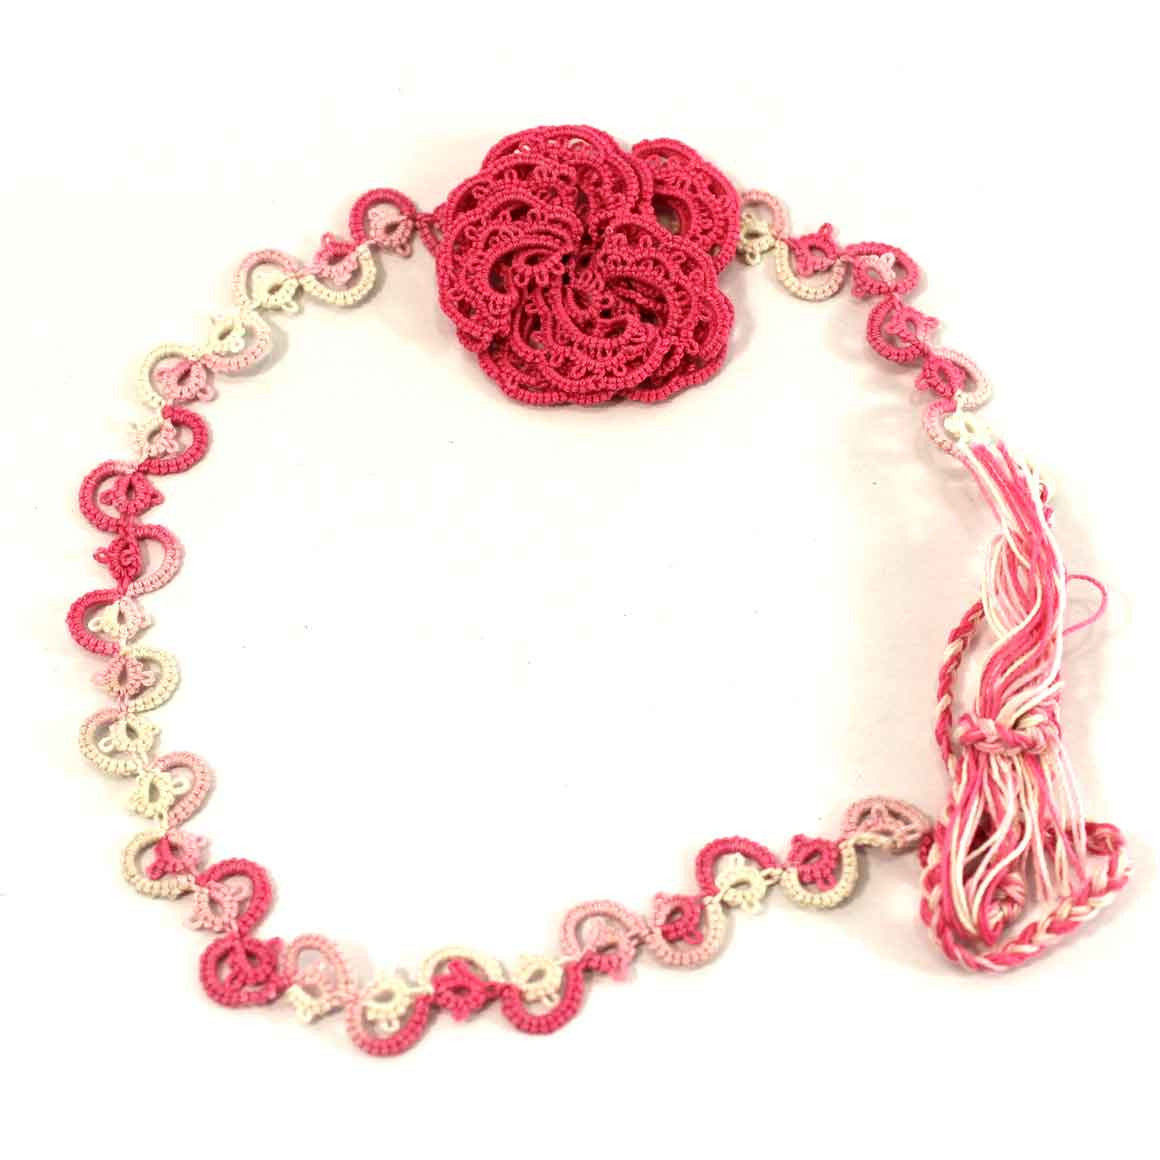 Fair Trade Ethical Tatted Headband Rose